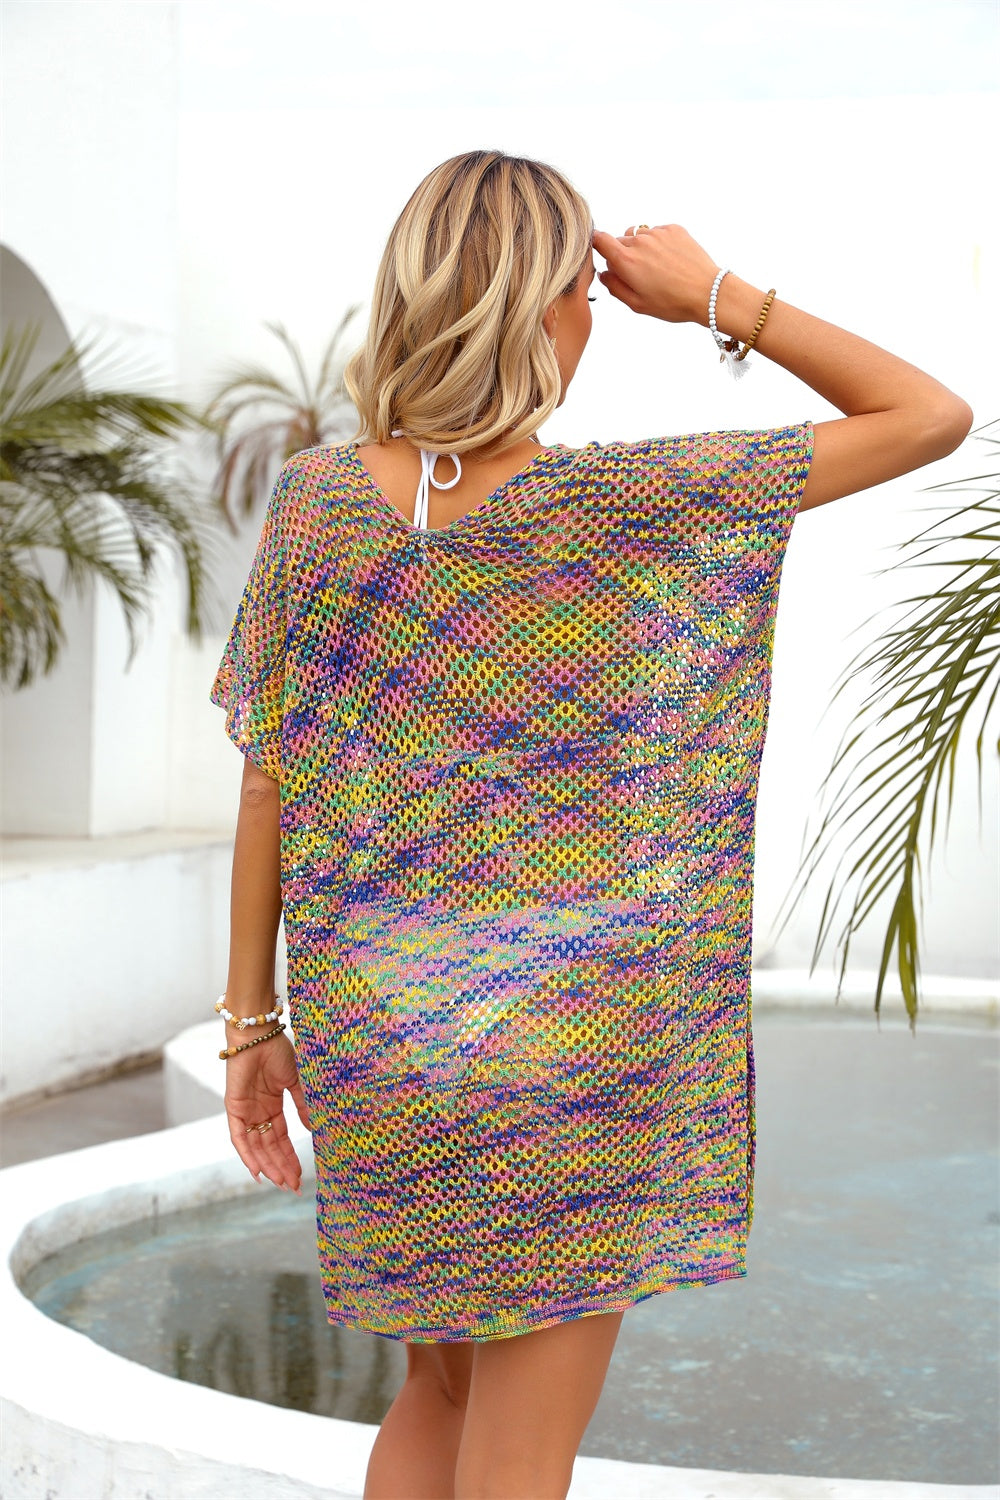 Sunset Vacation  Openwork Contrast Short Sleeve Cover-Up  Sunset and Swim   